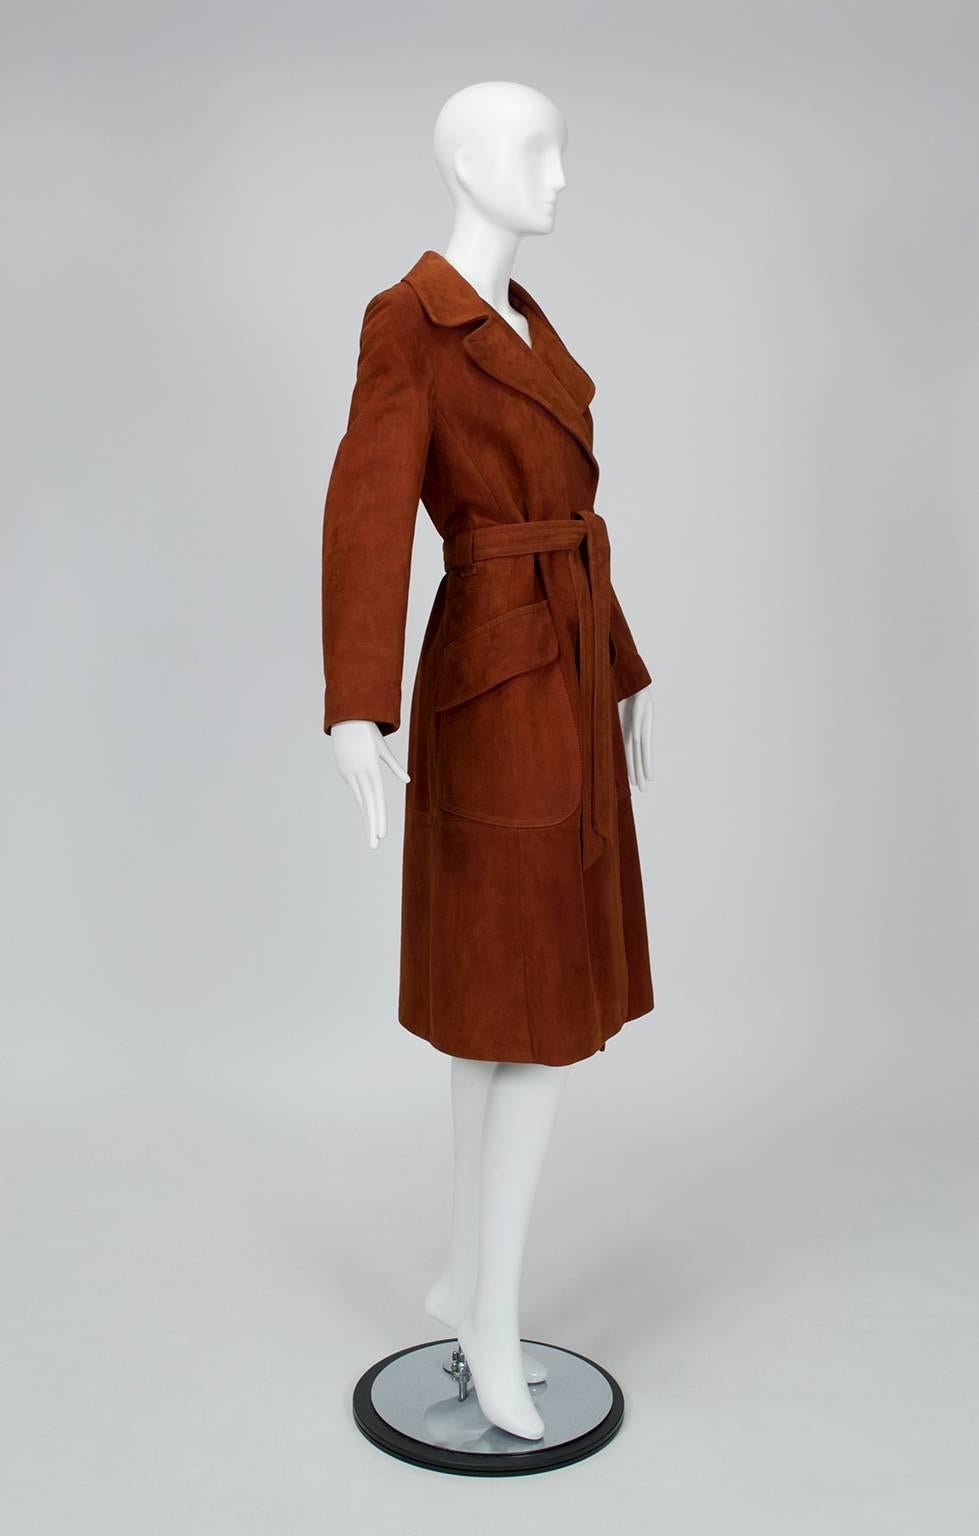 With its buttery texture, spicy color and bohemian details, this timeless trench coat vibrates with "rich hippie" goodness. Pair with a floppy brim hat and channel Angelica Huston during her Jack Nicholson days.

Vintage midi-length